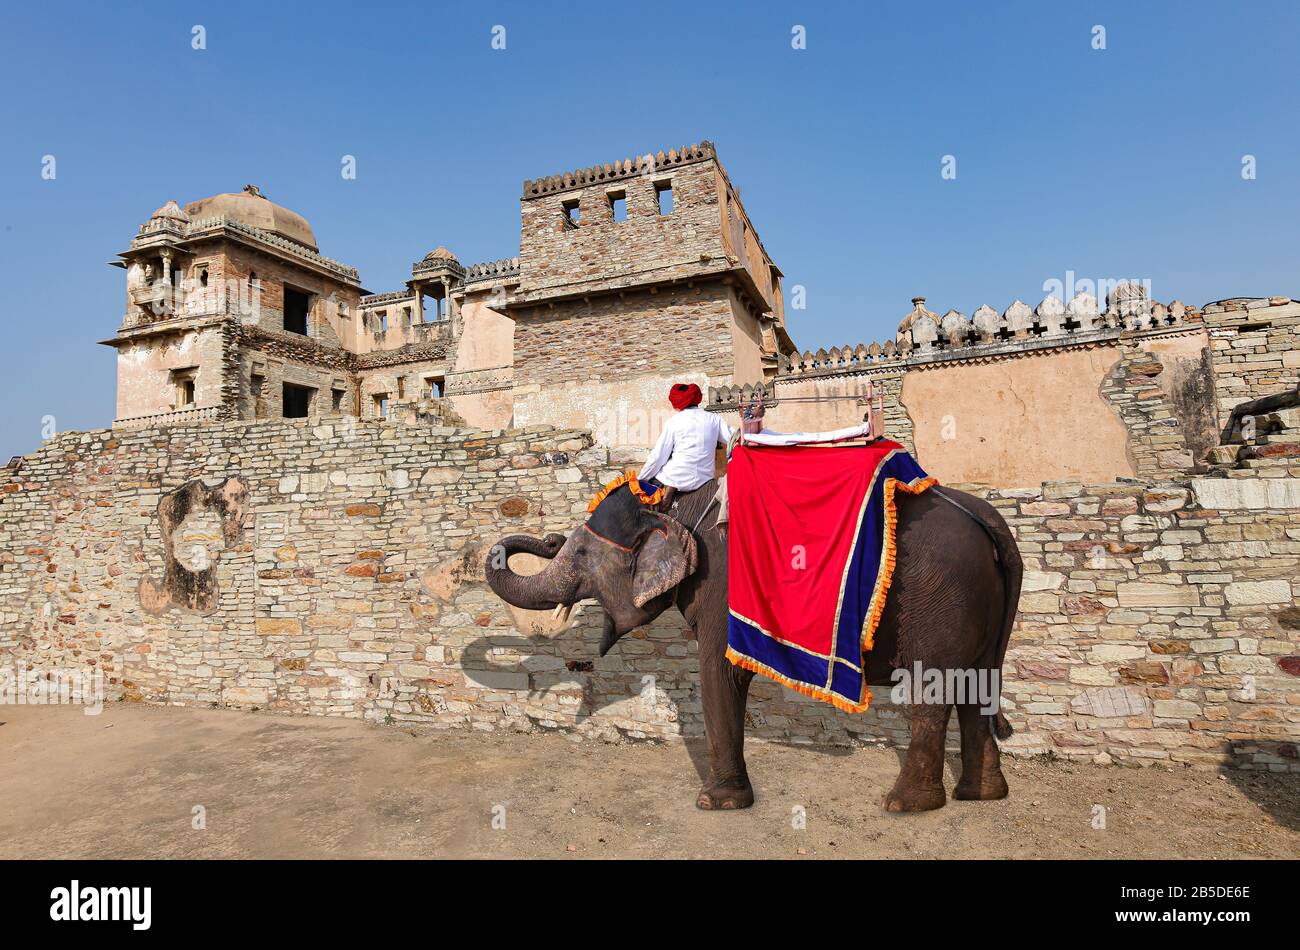 Rana Kumbha Palace at the historic Chittorgarh Fort Rajasthan with view of decorated Indian elephant used for tourist ride Stock Photo